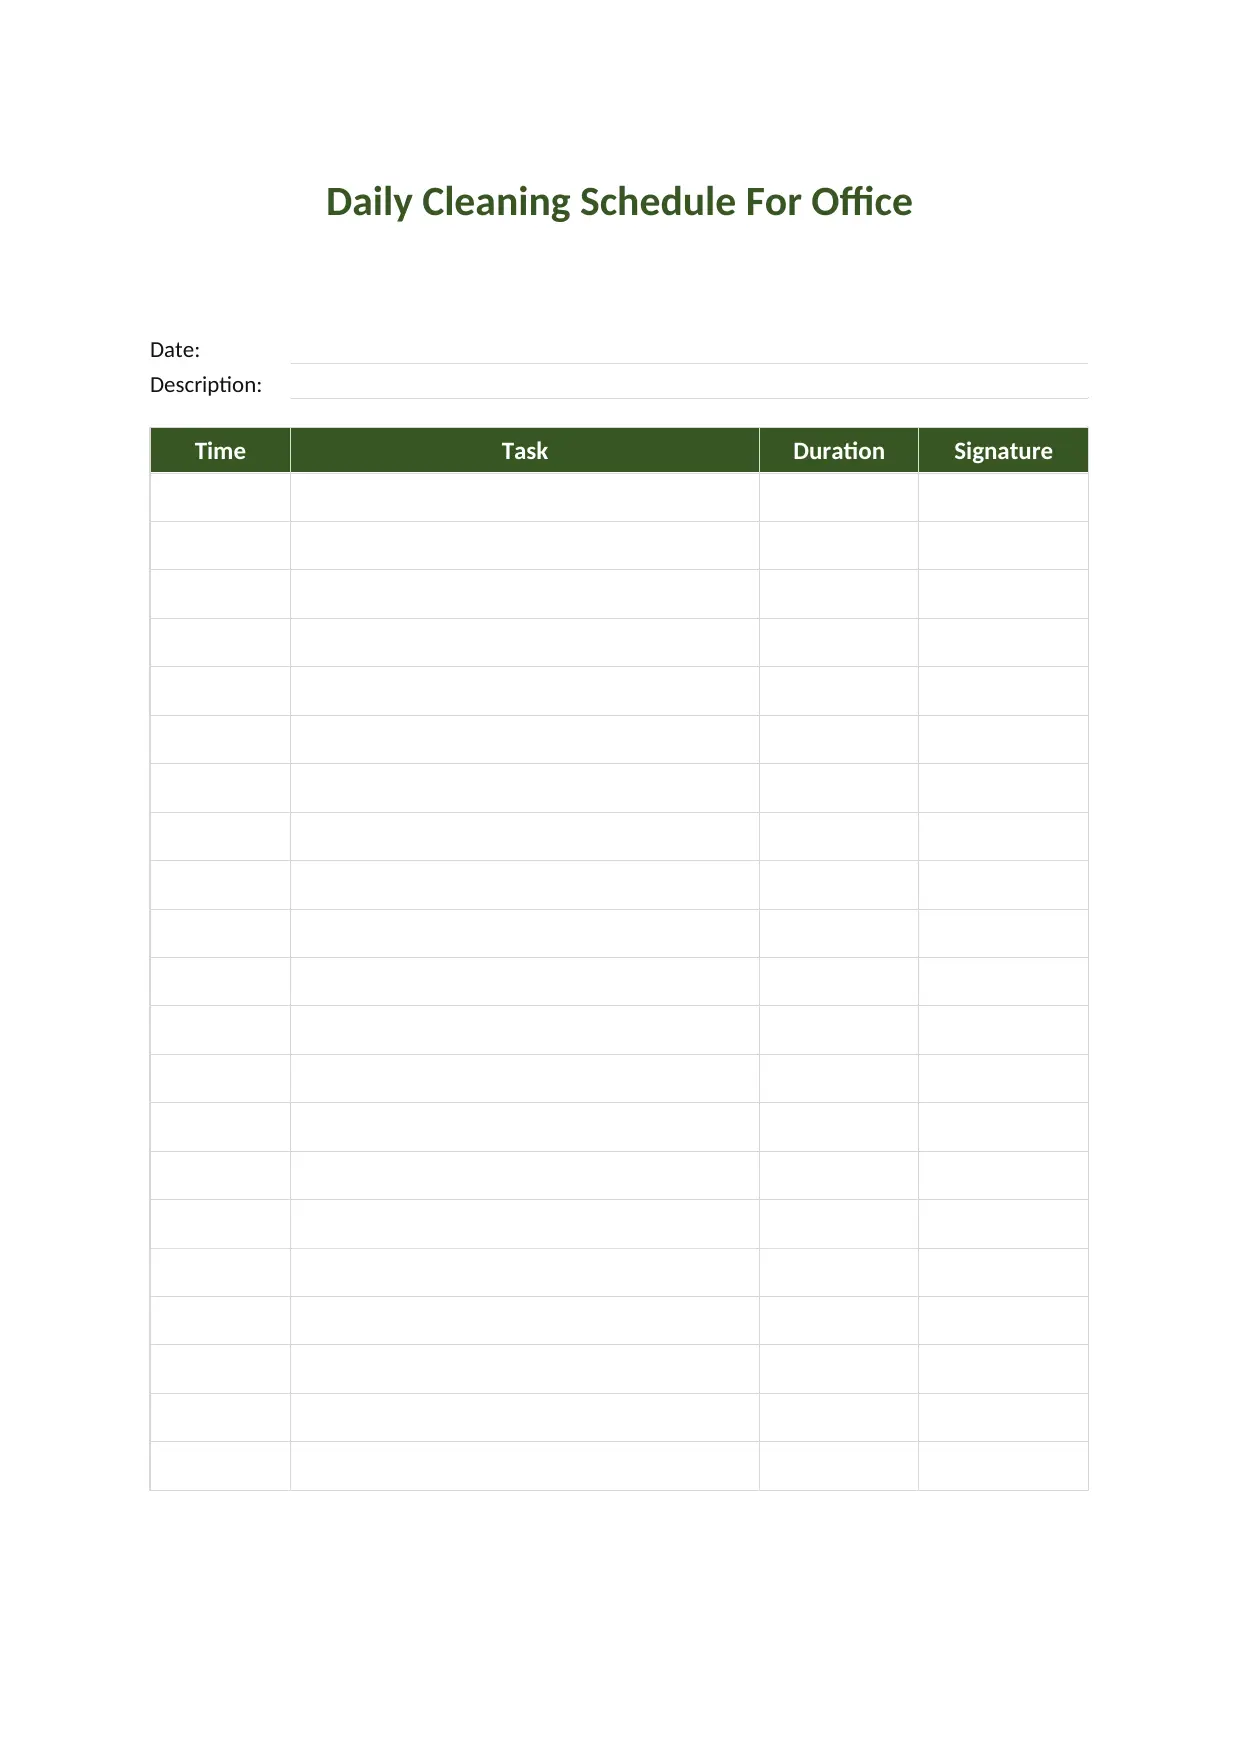 Daily Cleaning Schedule Template for Office